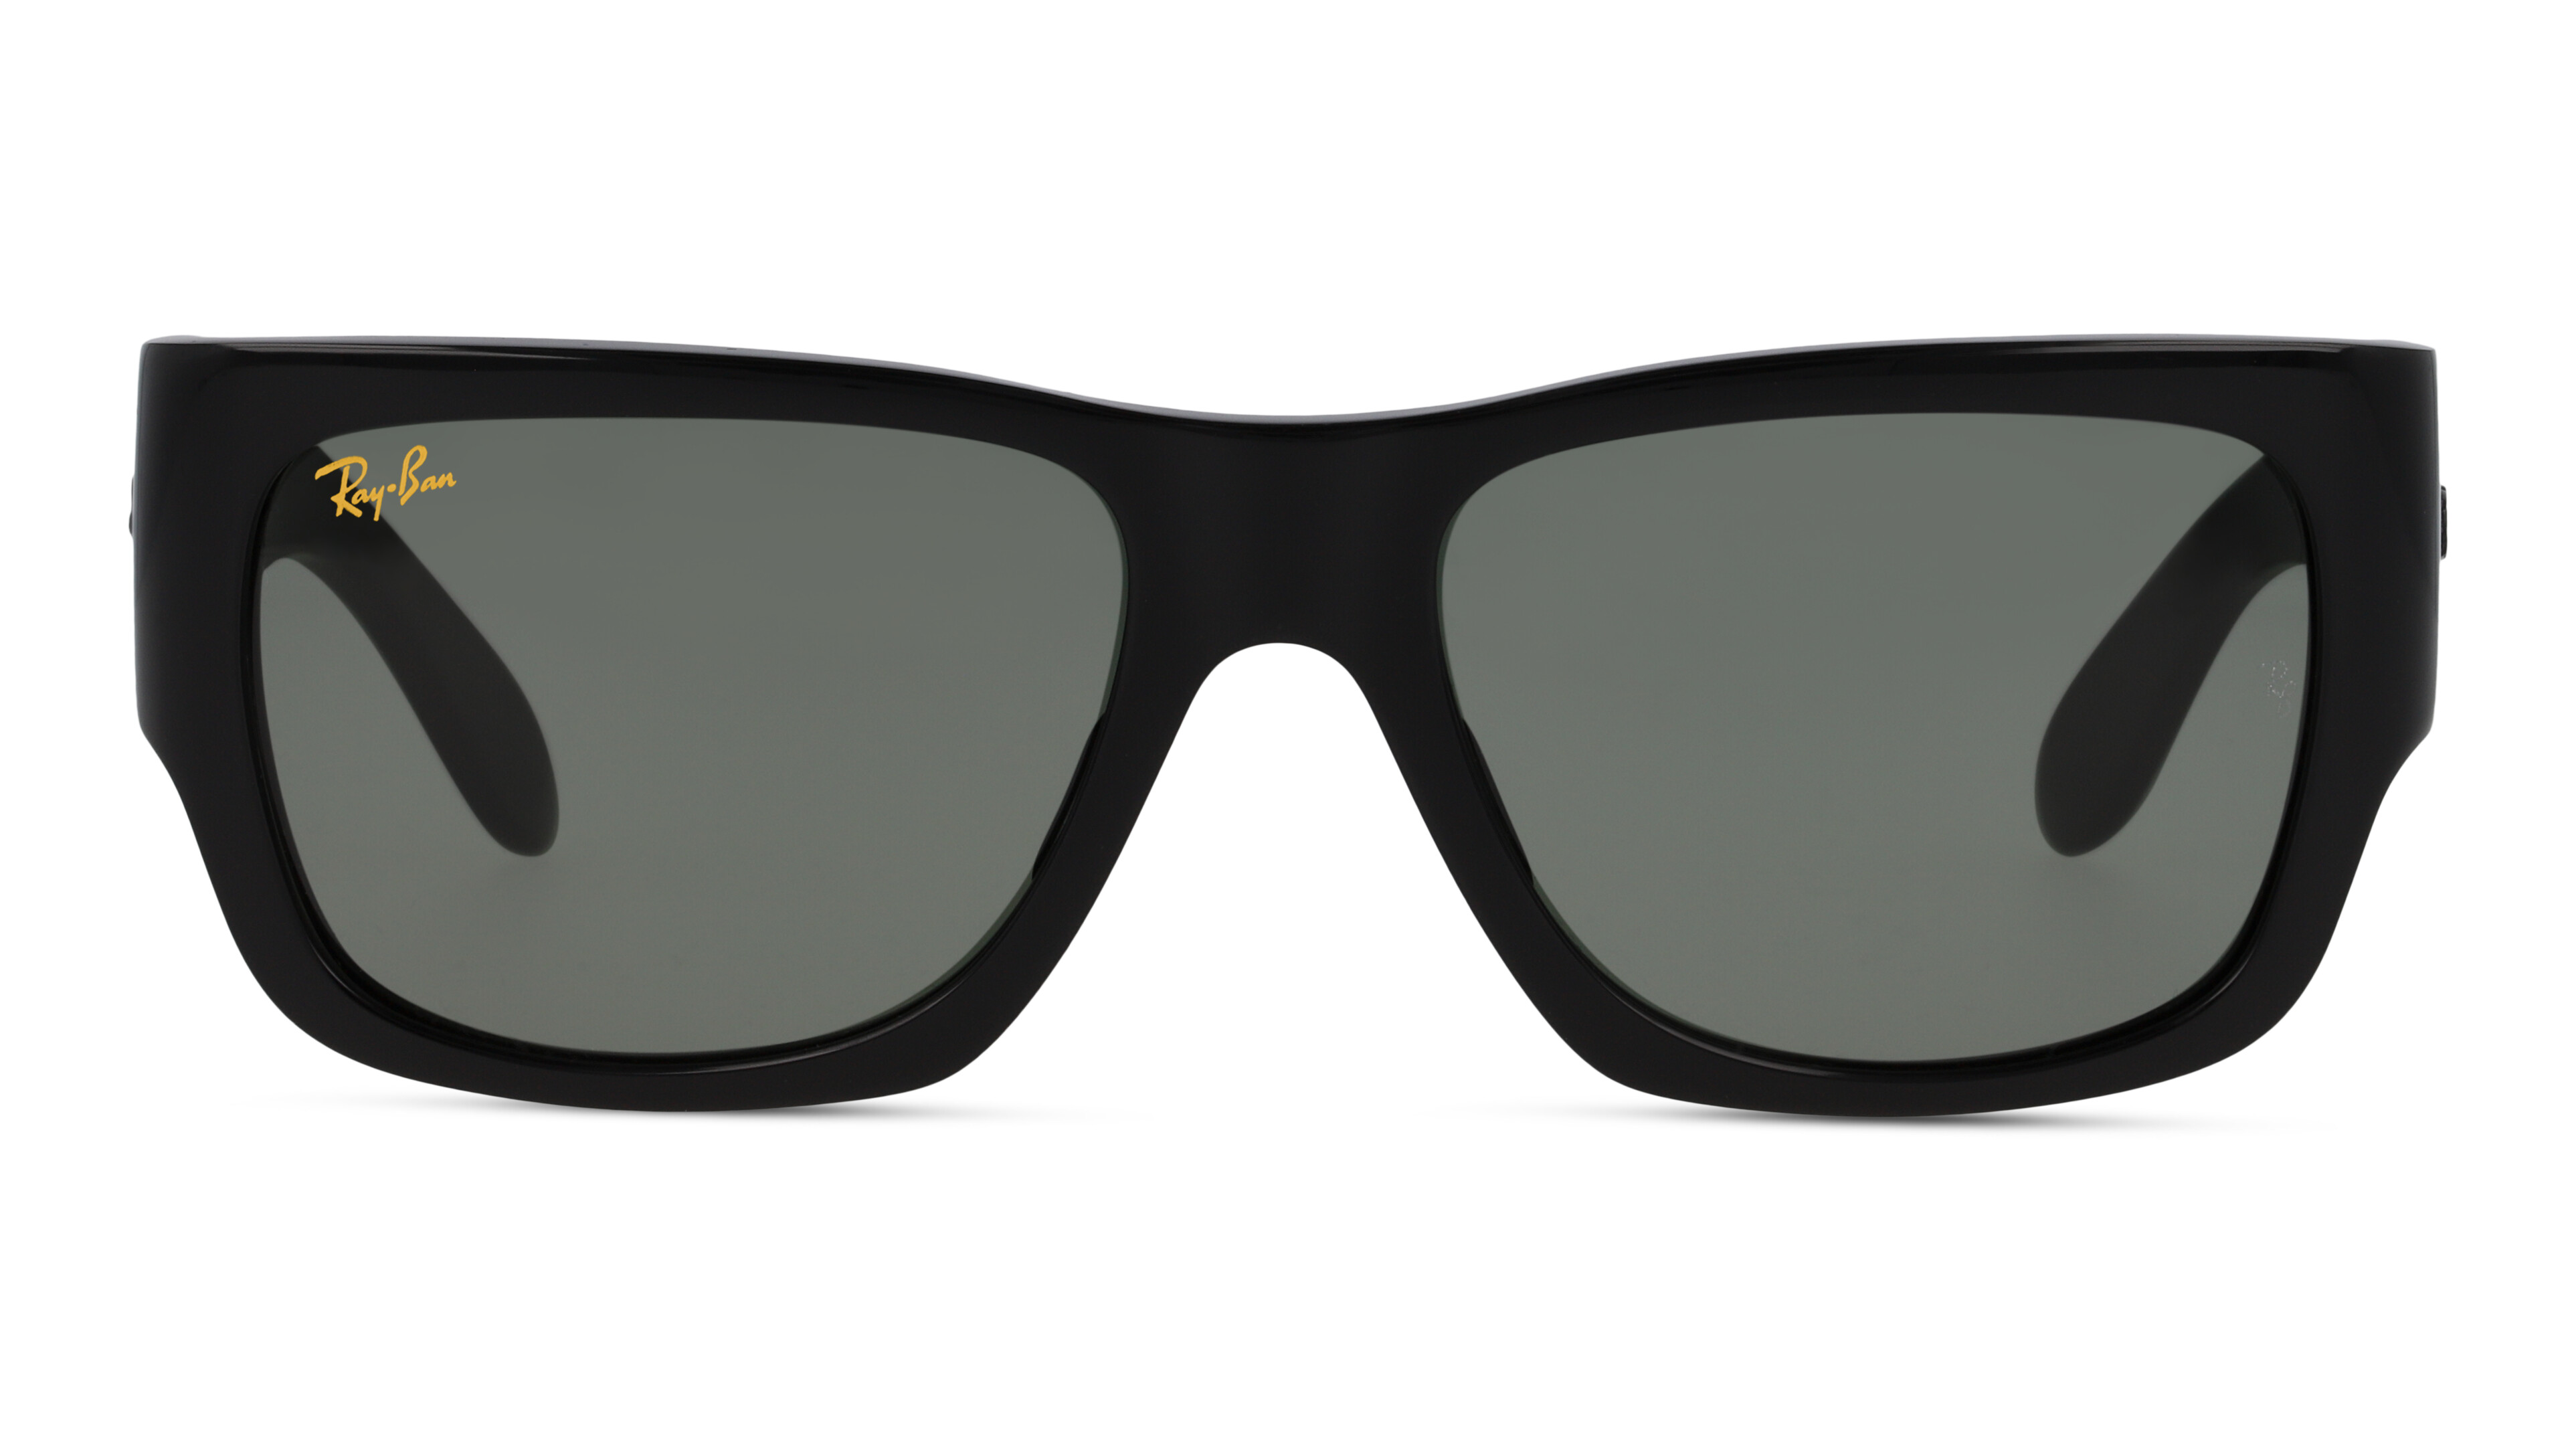 [products.image.front] Ray-Ban WAYFARER NOMAD 0RB2187 901/31 Sonnenbrille